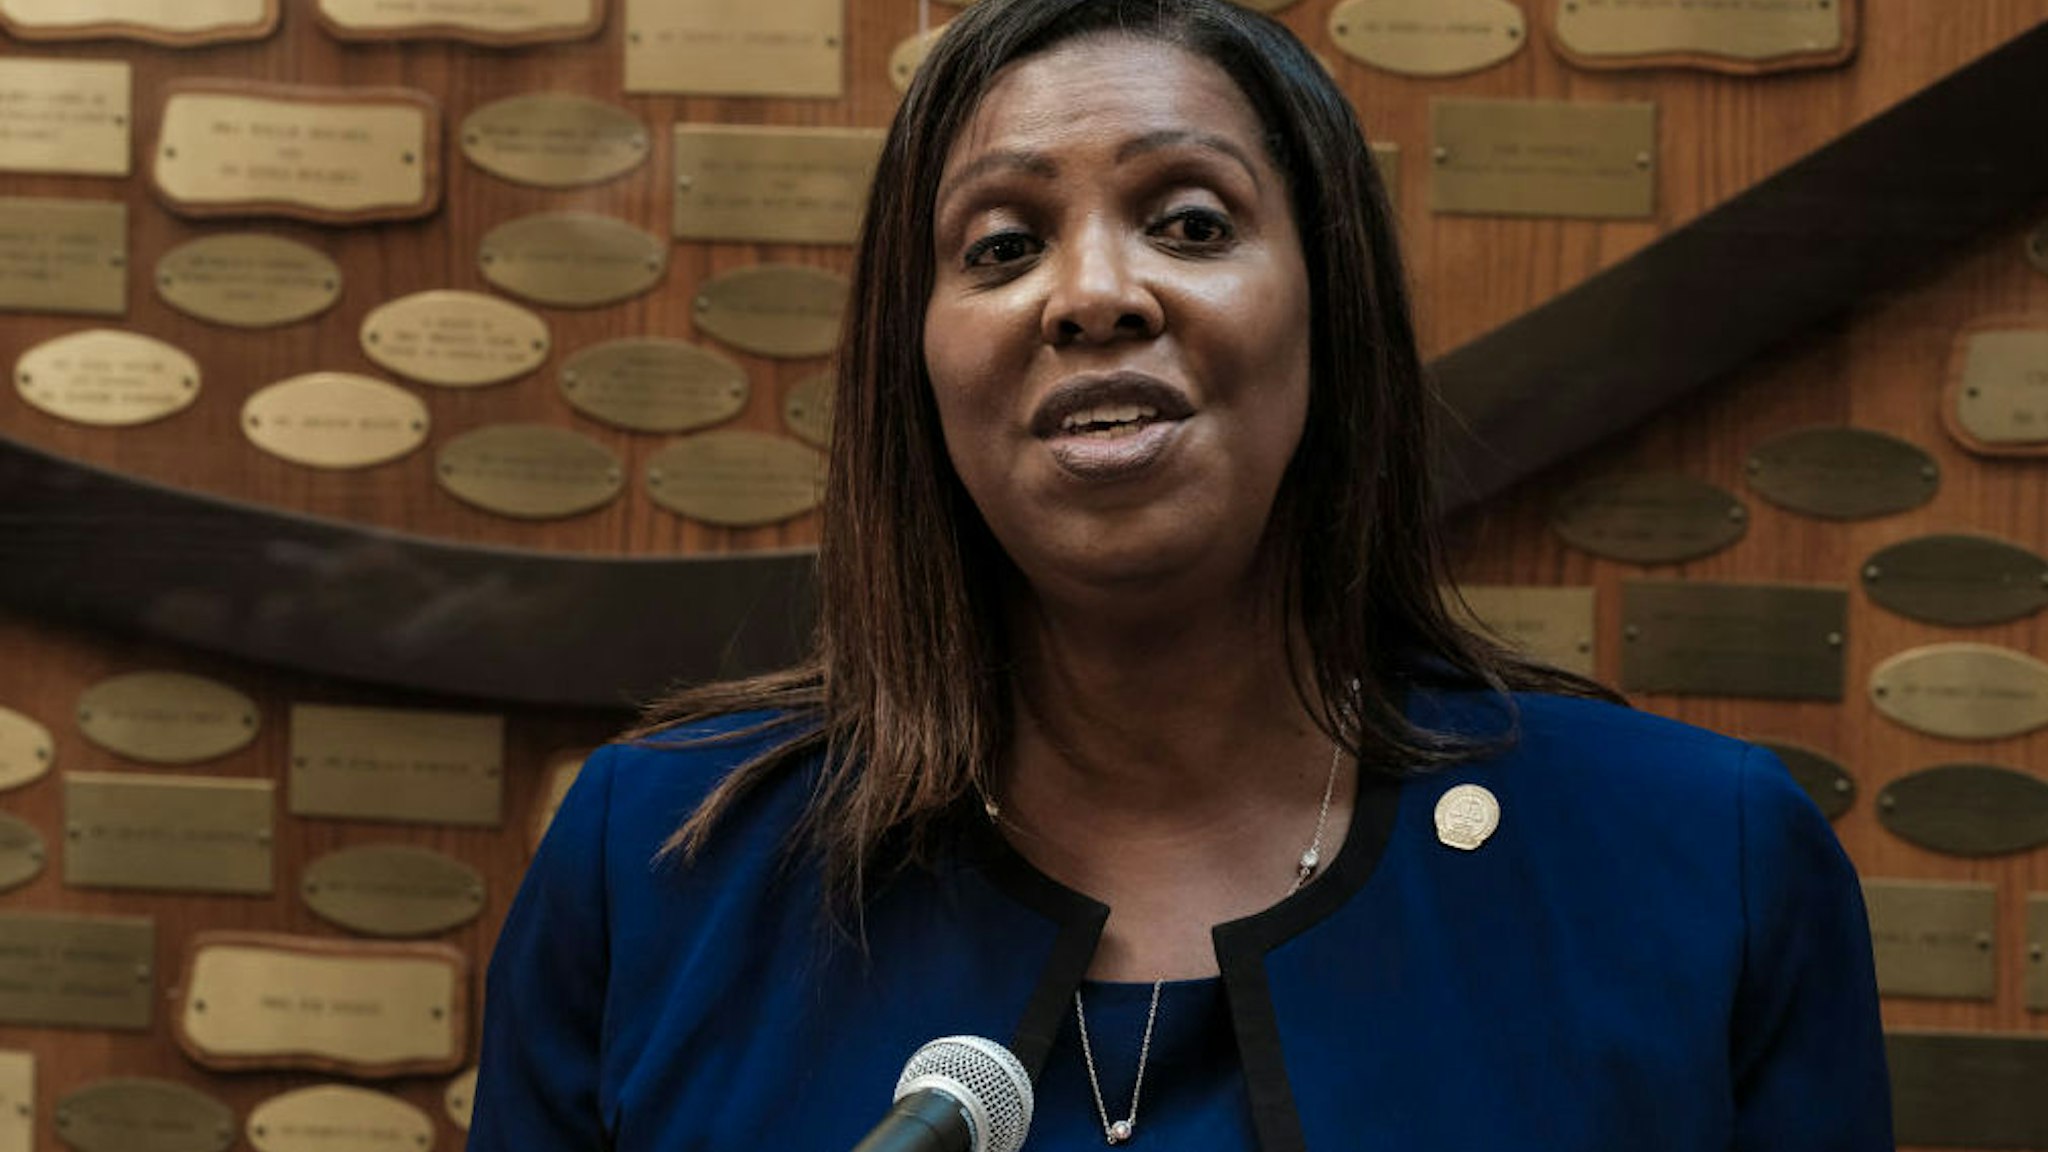 New York State Attorney General Letitia James speaks at a news conference about the ongoing investigation into the death of Daniel Prude on September 20, 2020 in Rochester, New York.